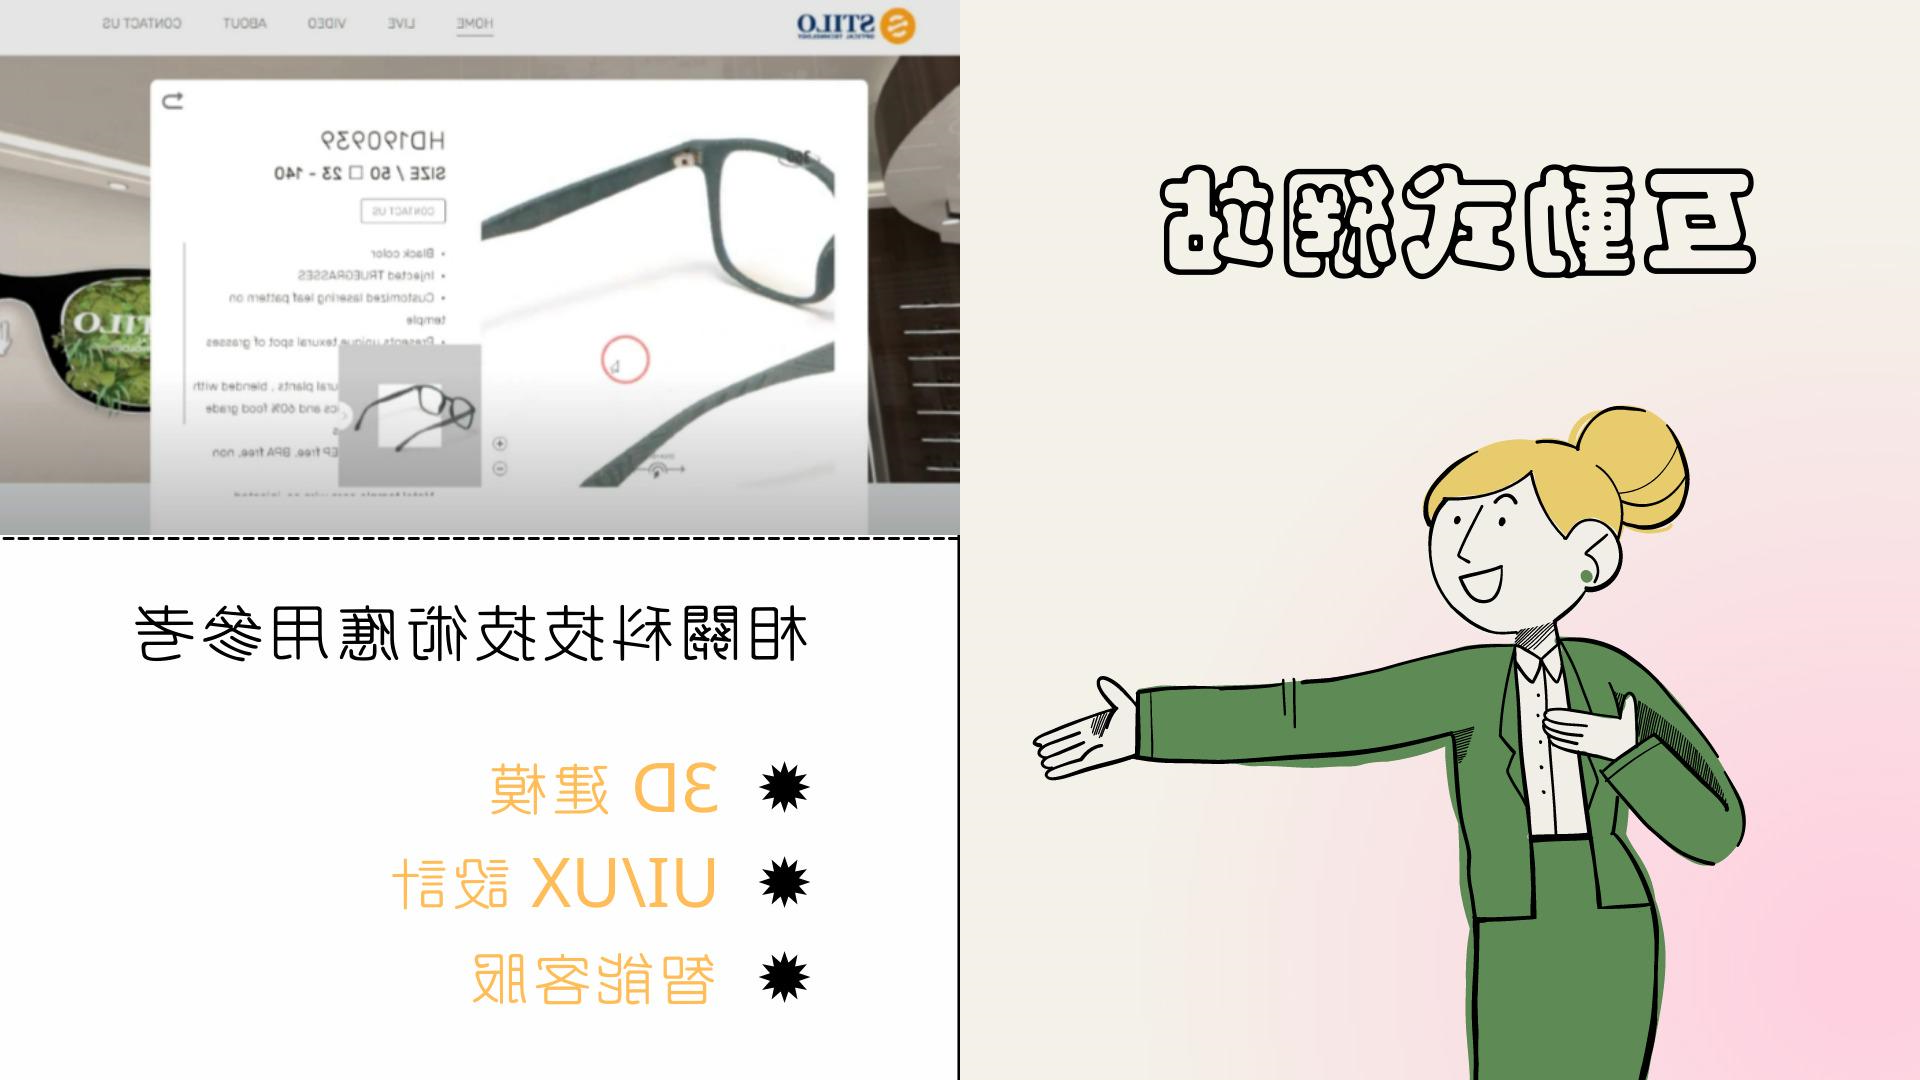 ag九游会登录j9入口
 Design, Interactive Website, Online Display, 3D Modeling, VR Virtual Reality, AR Augmented Reality